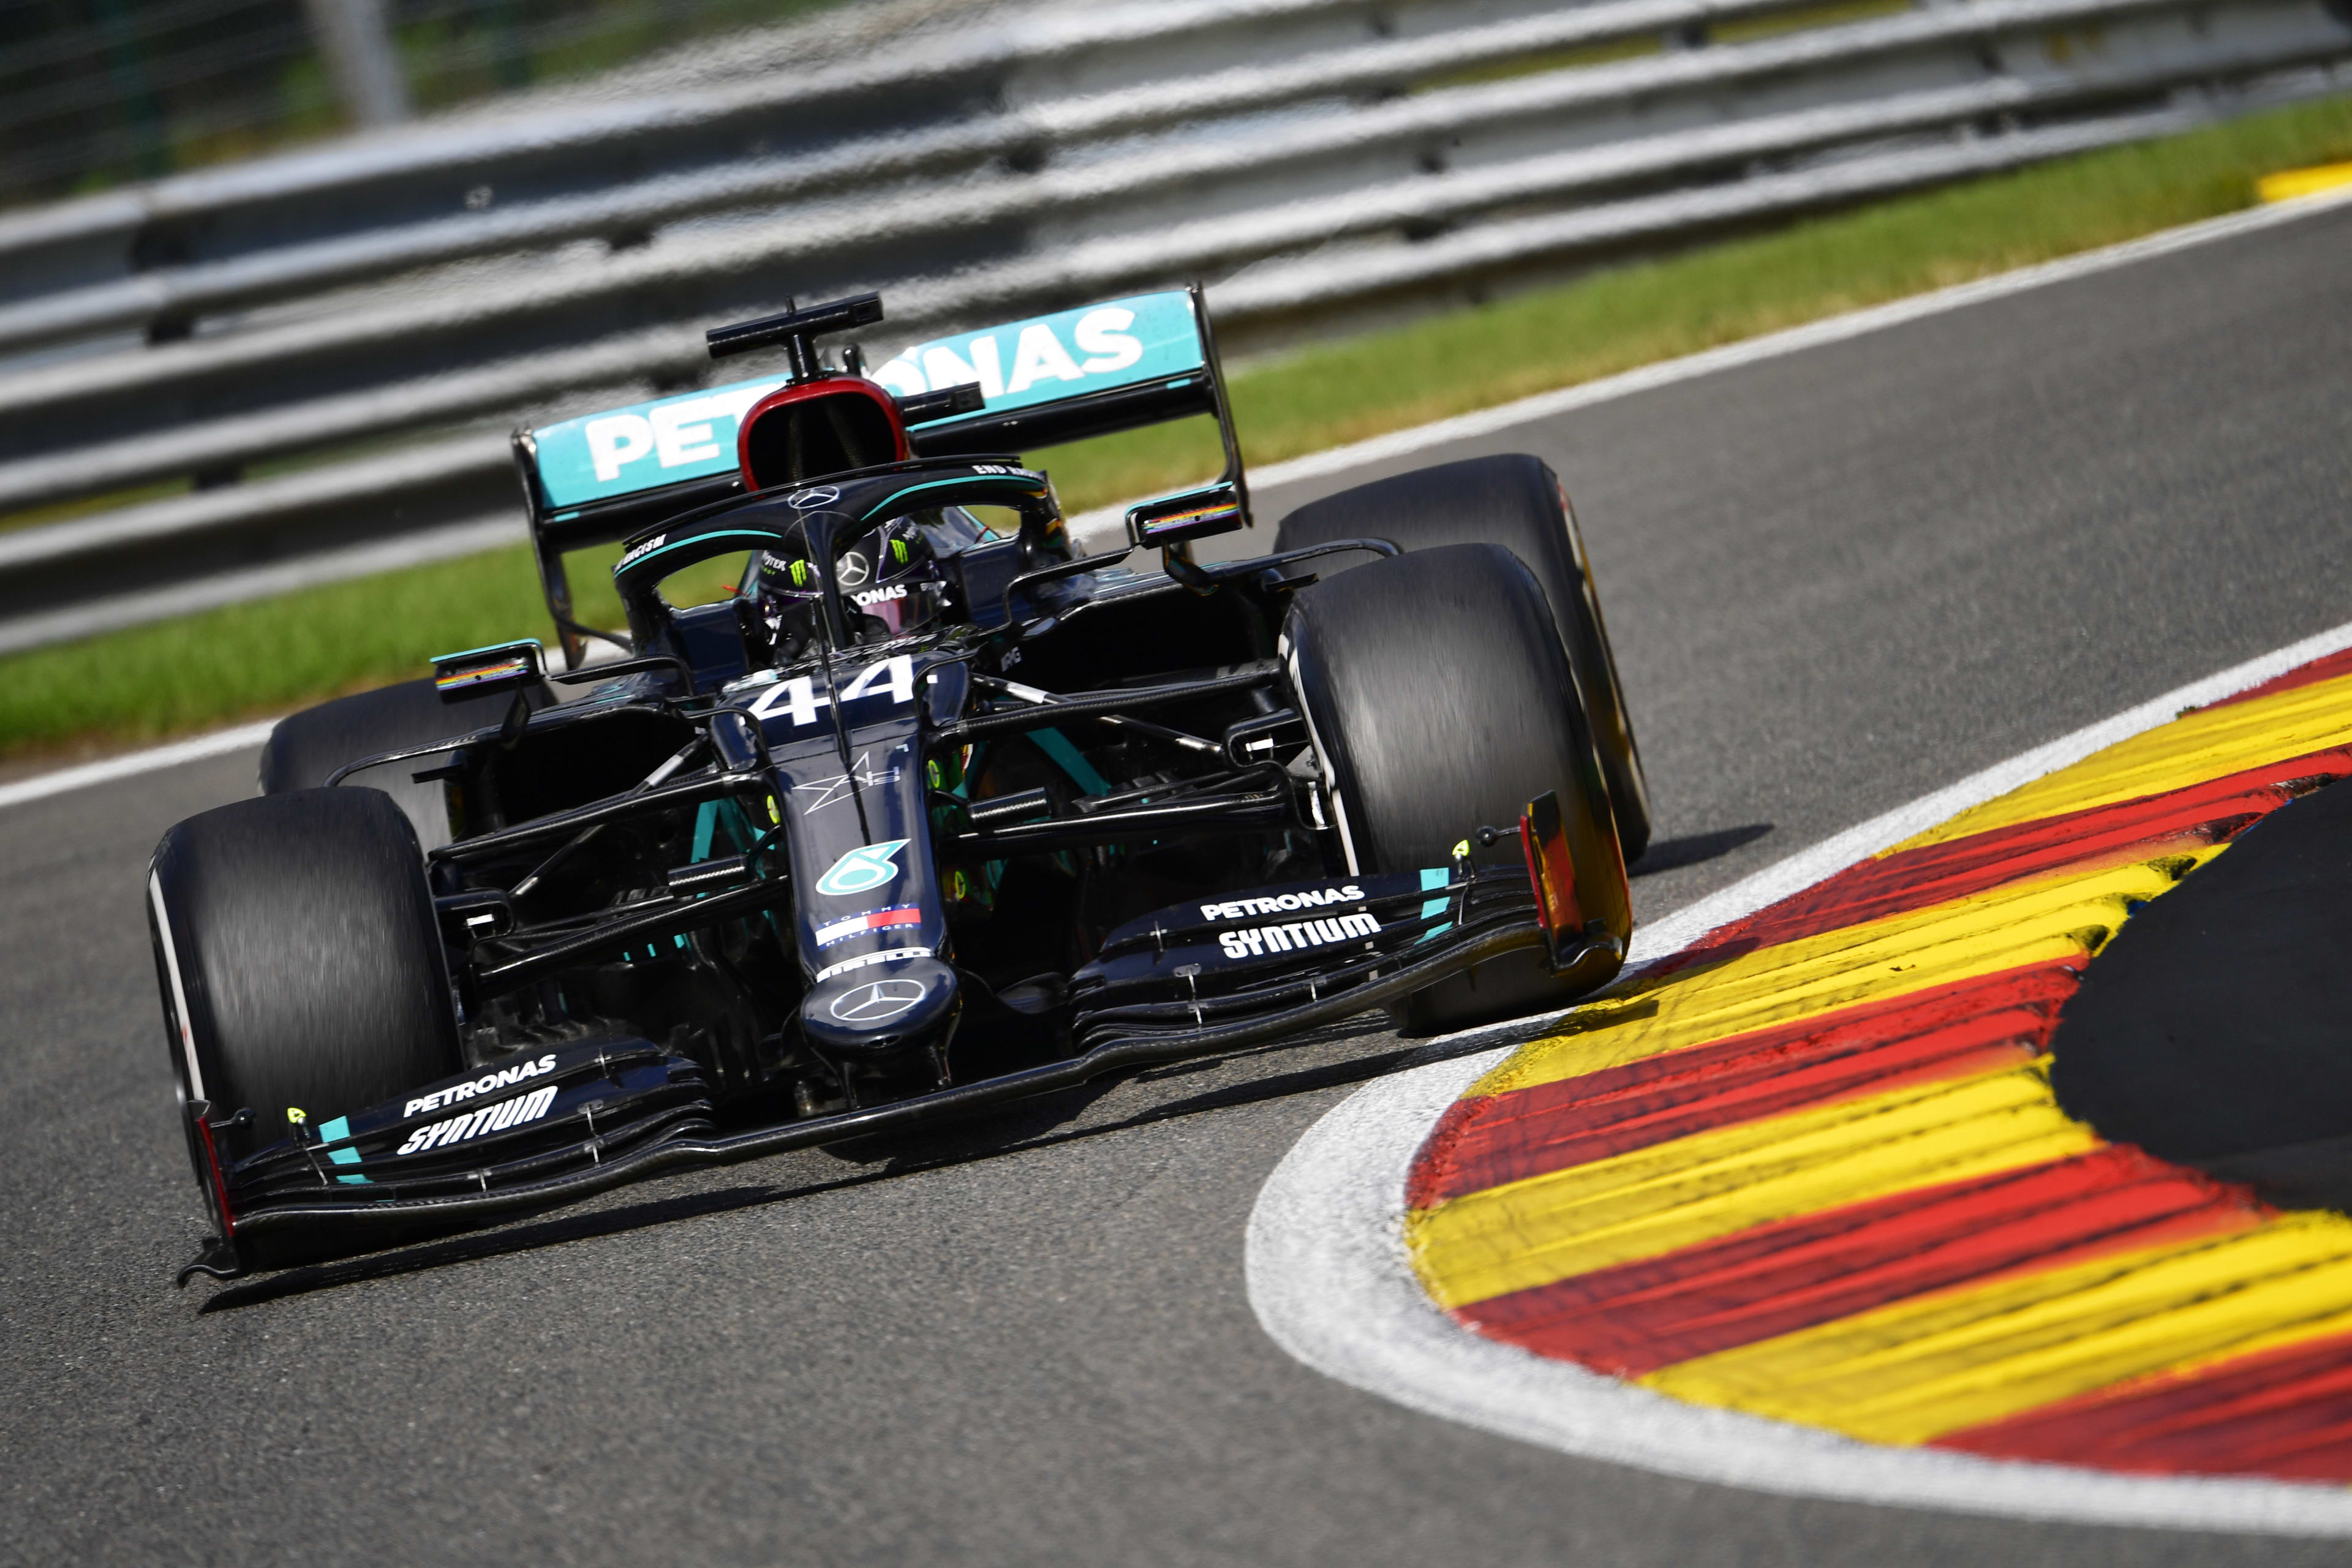 Belgian Grand Prix 2020 race report and highlights Hamilton takes masterful fourth win at Spa from Bottas as Ferrari finish out of the points Formula 1®